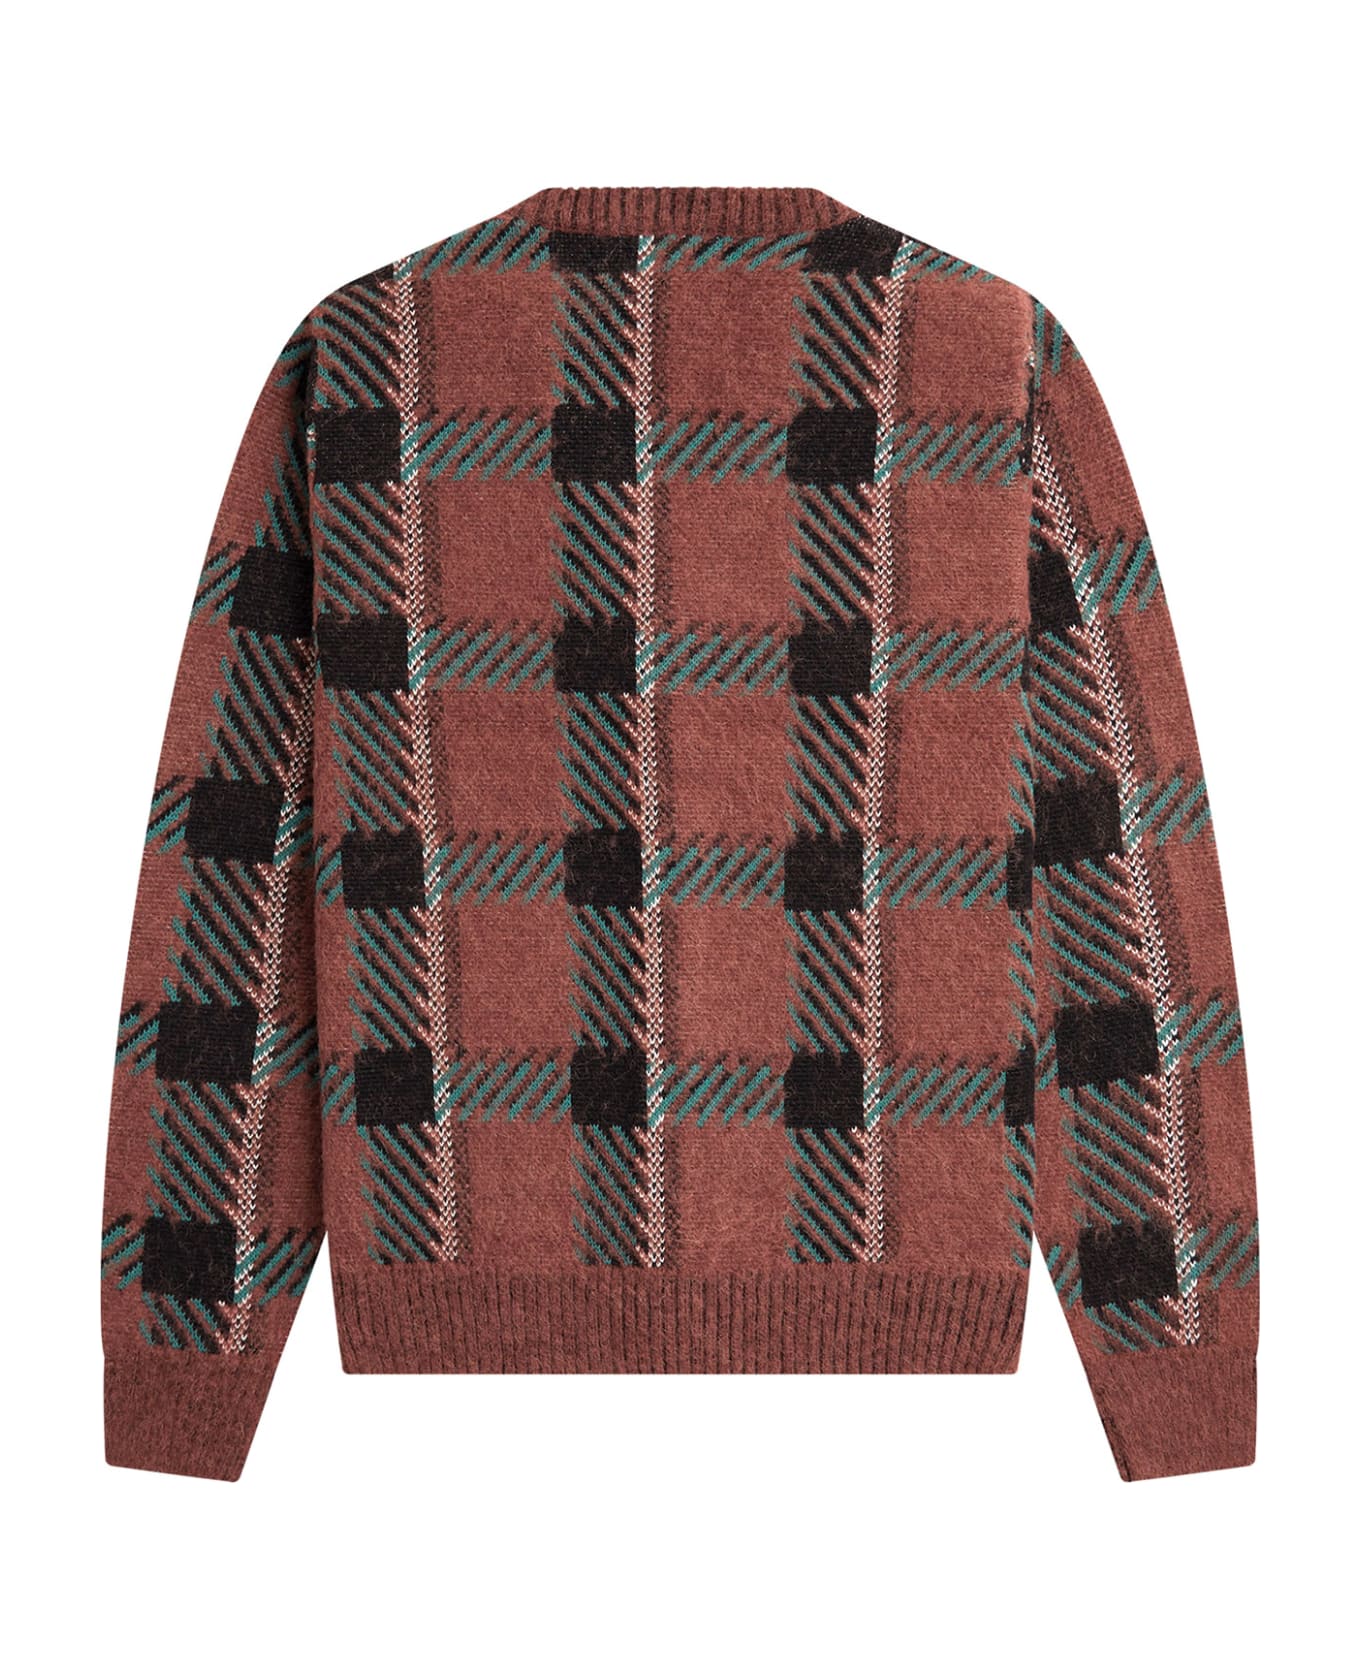 Fred Perry Cardigan - Brown